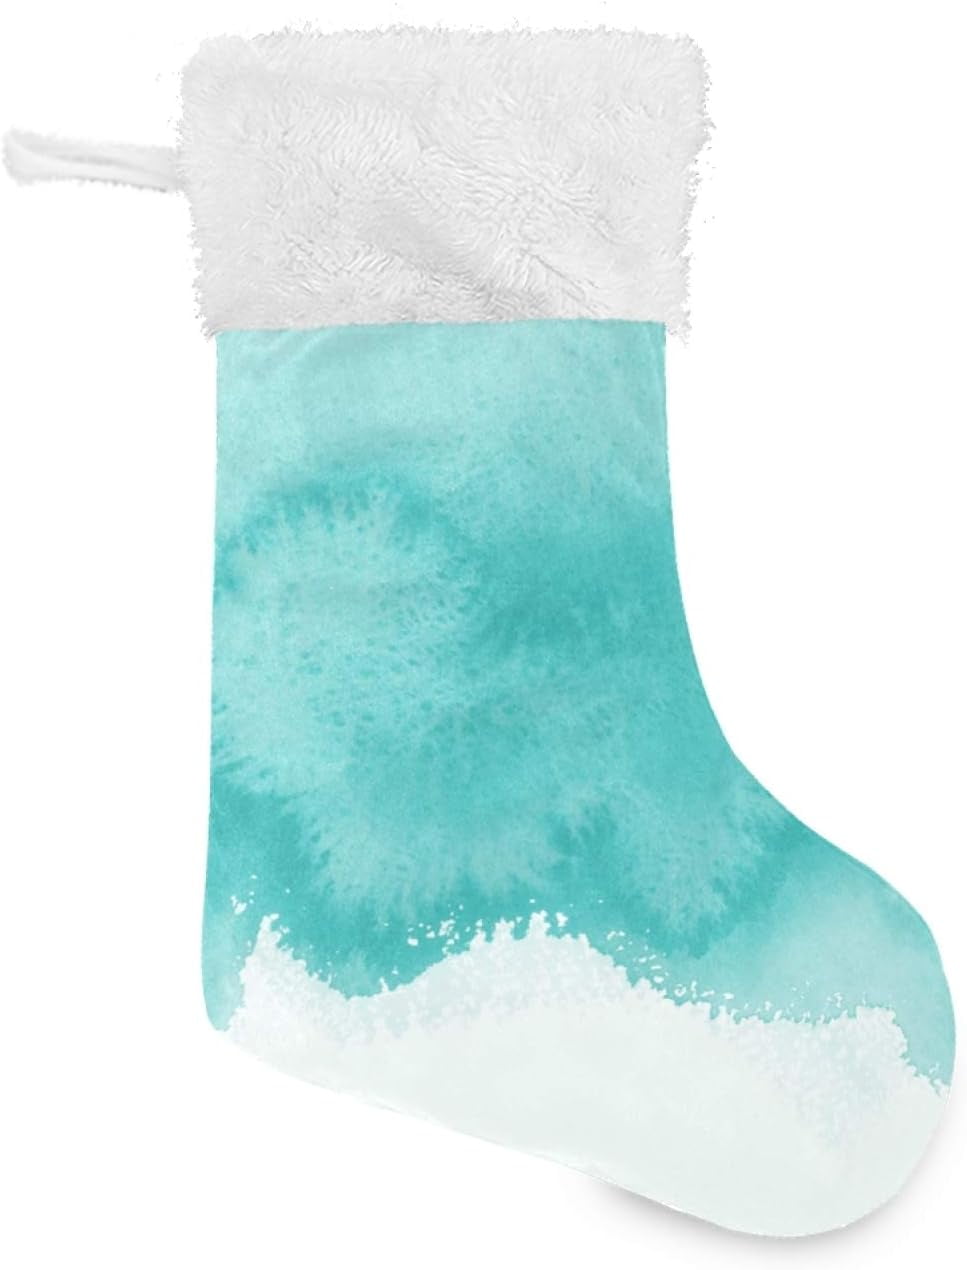 Coolnut 17.7 Inch Christmas Stockings, 1 PCS Teal Blue Watercolor ...